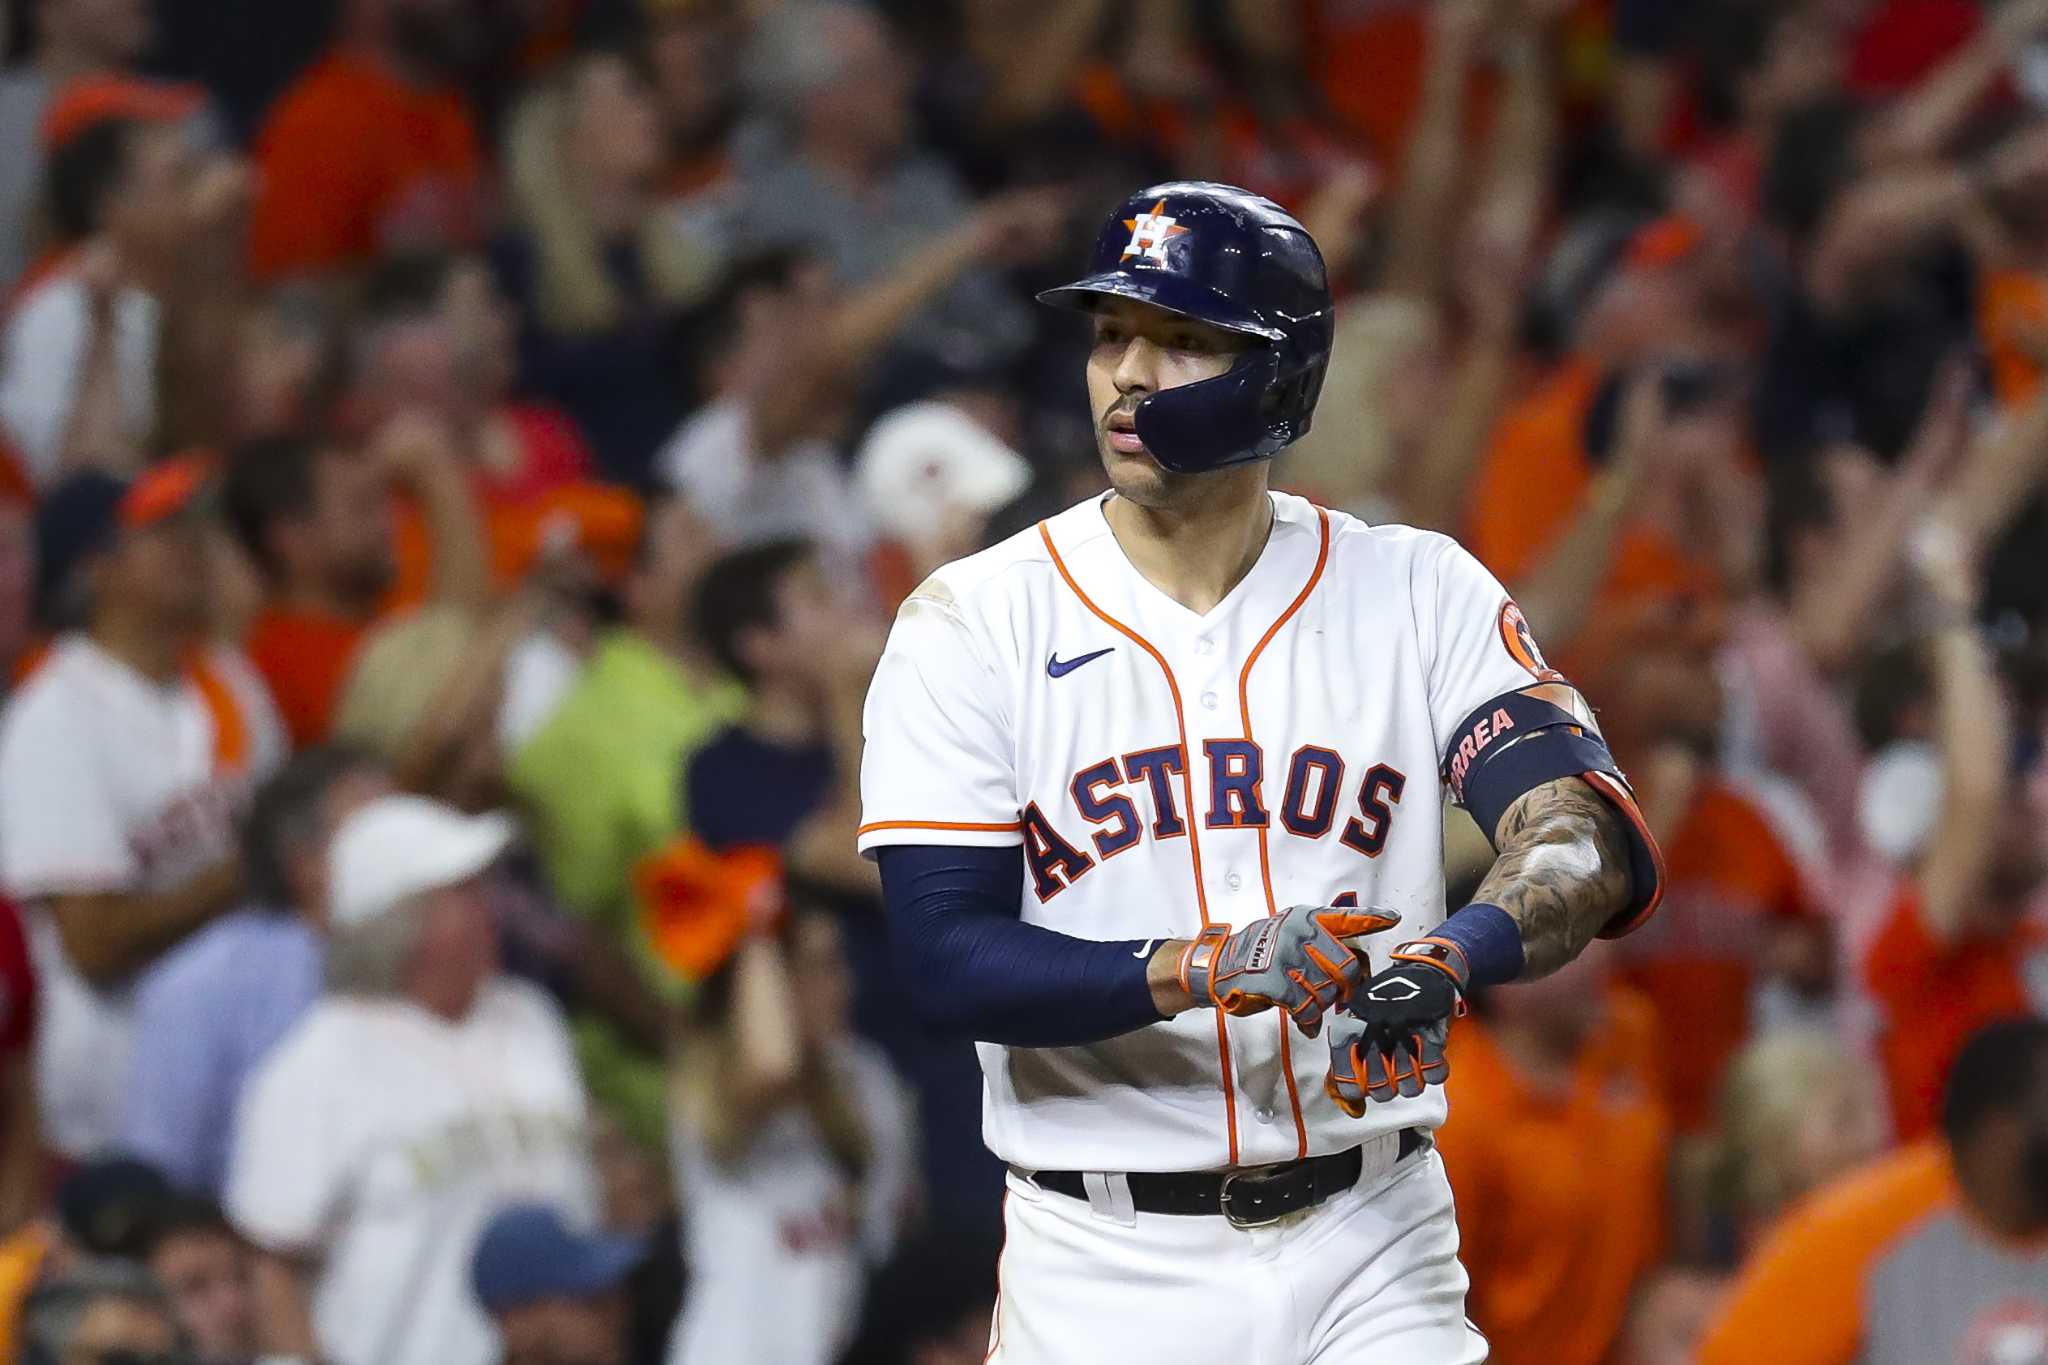 Carlos Correa makes time for memorable HR celebration in ALCS Game 1  National News - Bally Sports